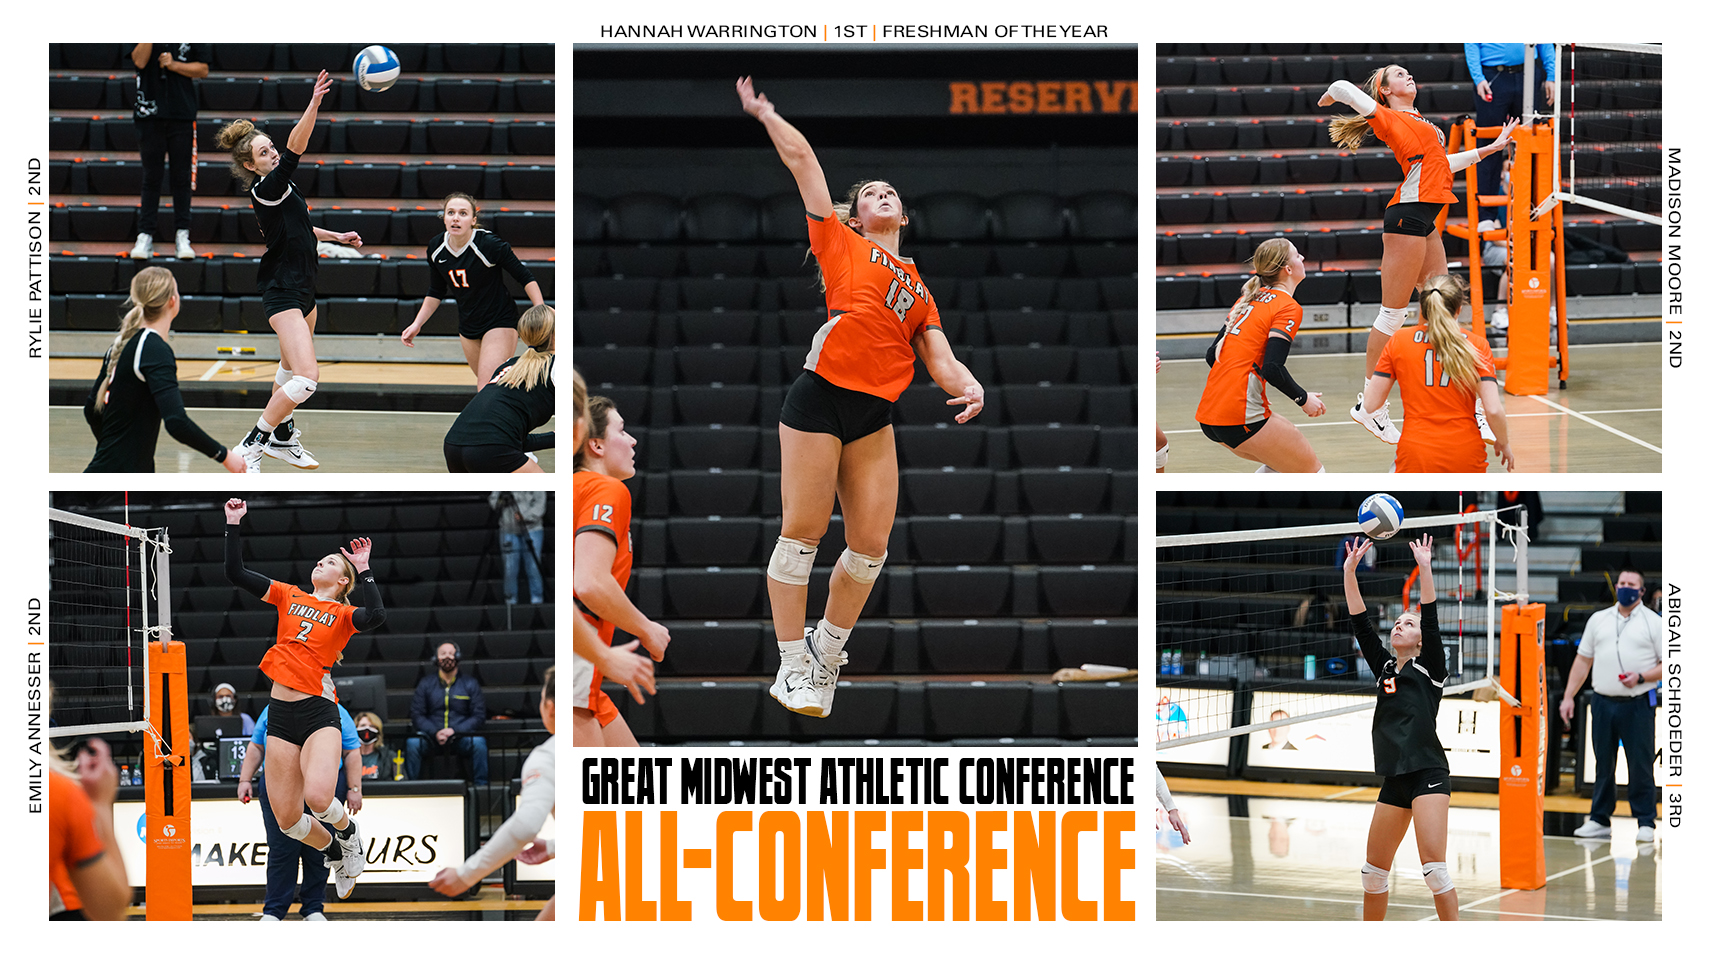 women's volleyball all-conference team